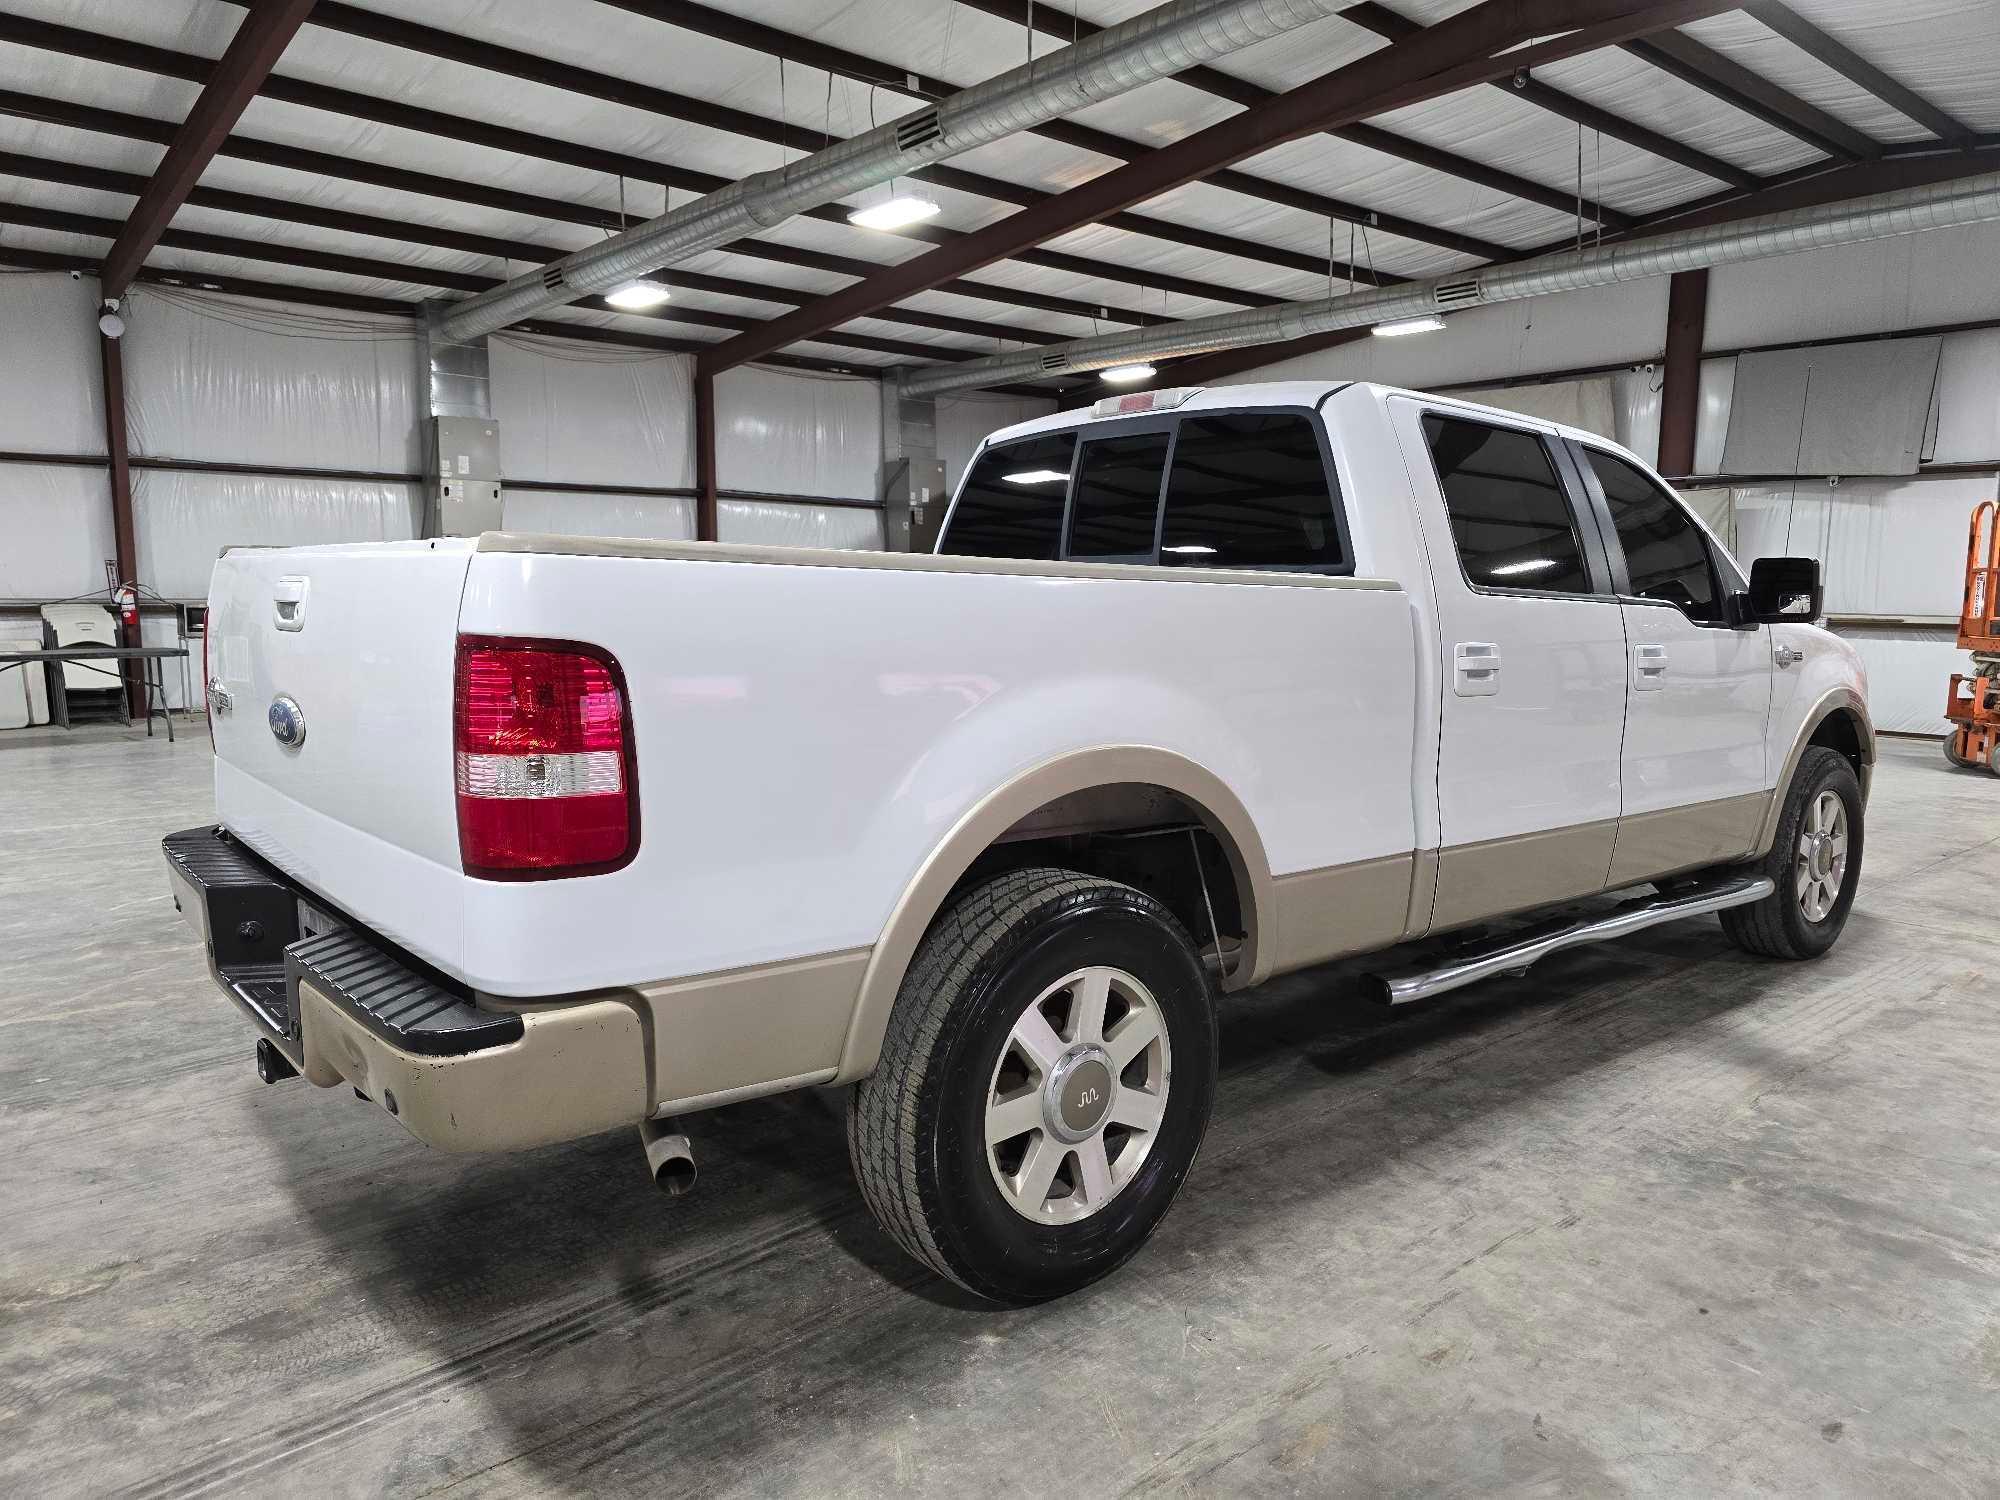 2007 King Ranch Ford F150 Pickup Truck